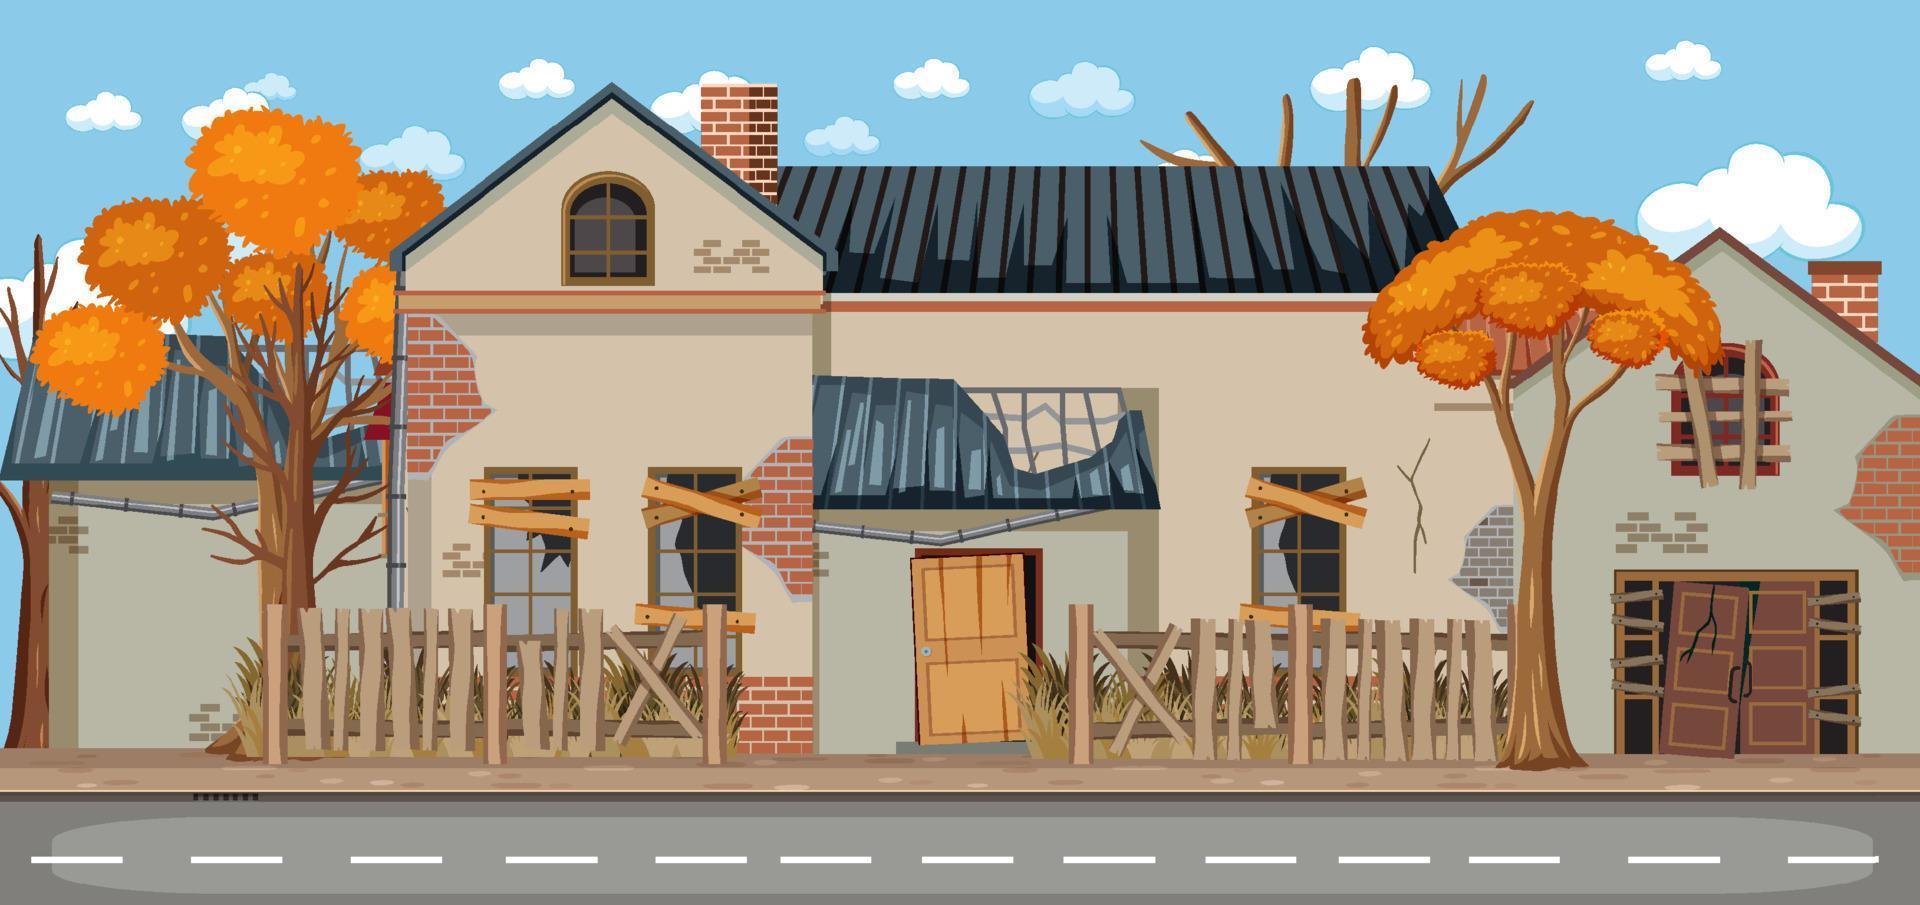 Abandon empty rural town with old broken house background vector